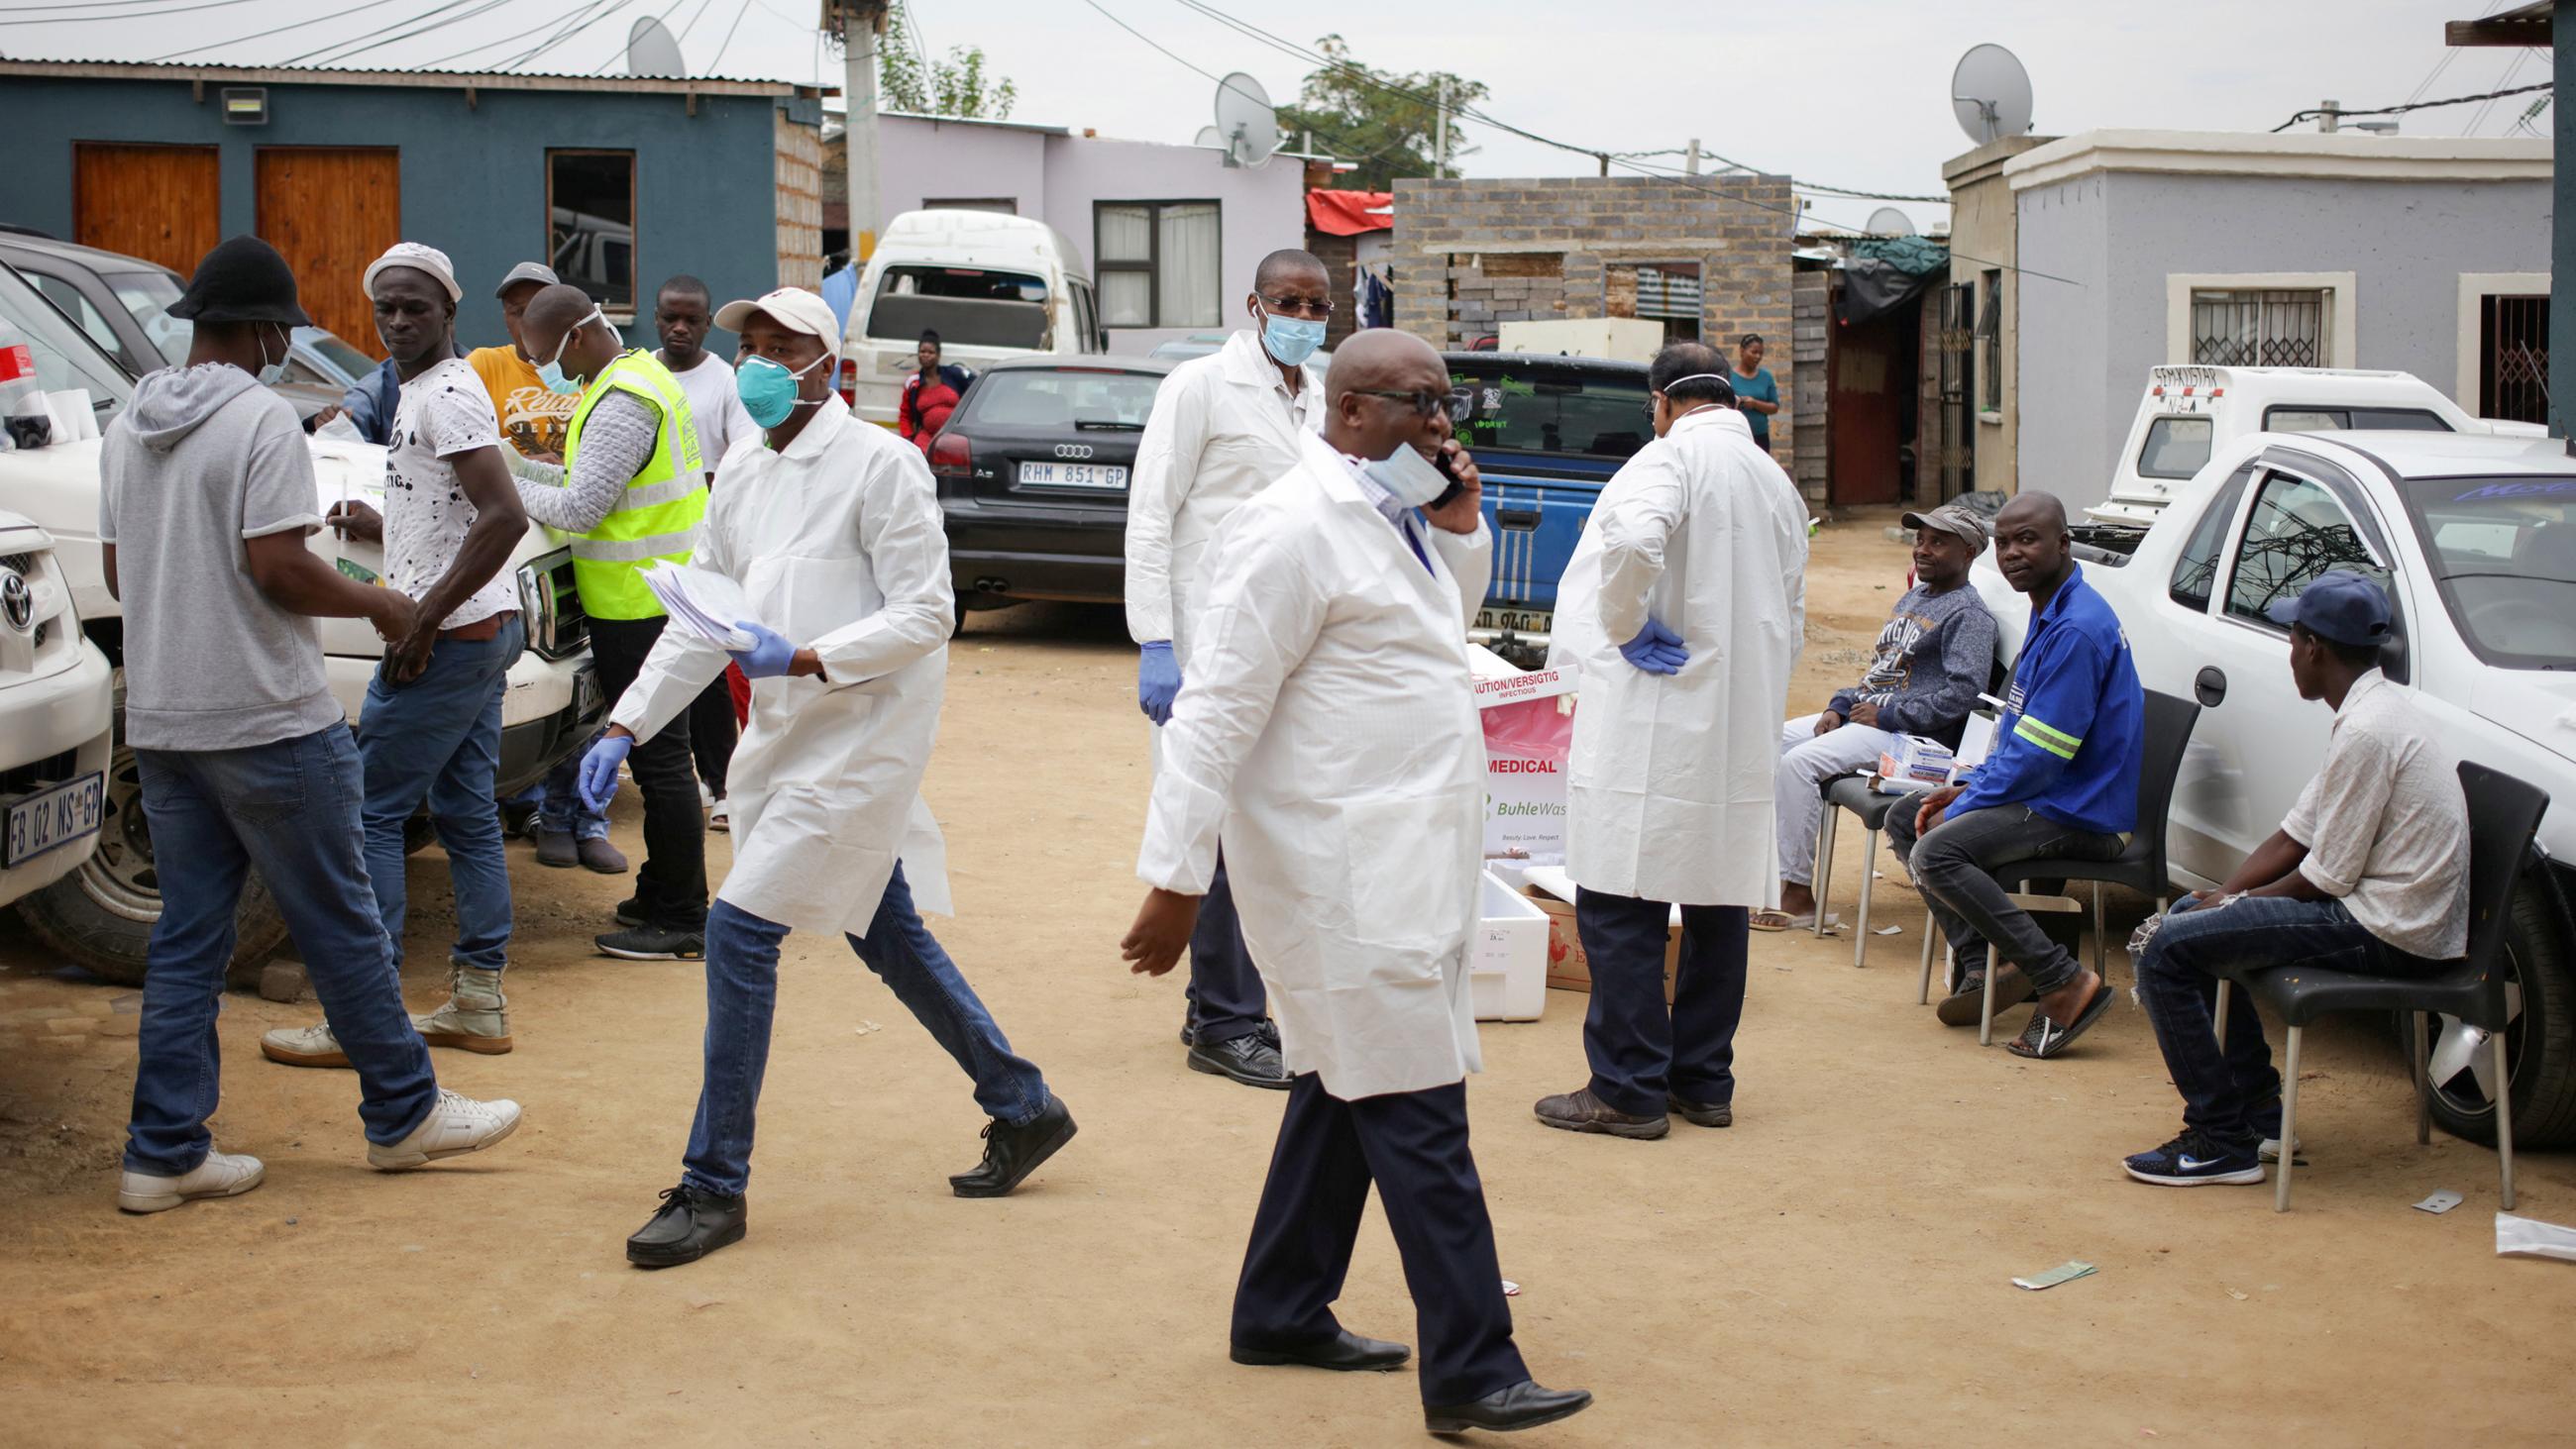 The photo shows about a half dozen health workers wearing white lab coats and a number of civilians waiting to be tested. 